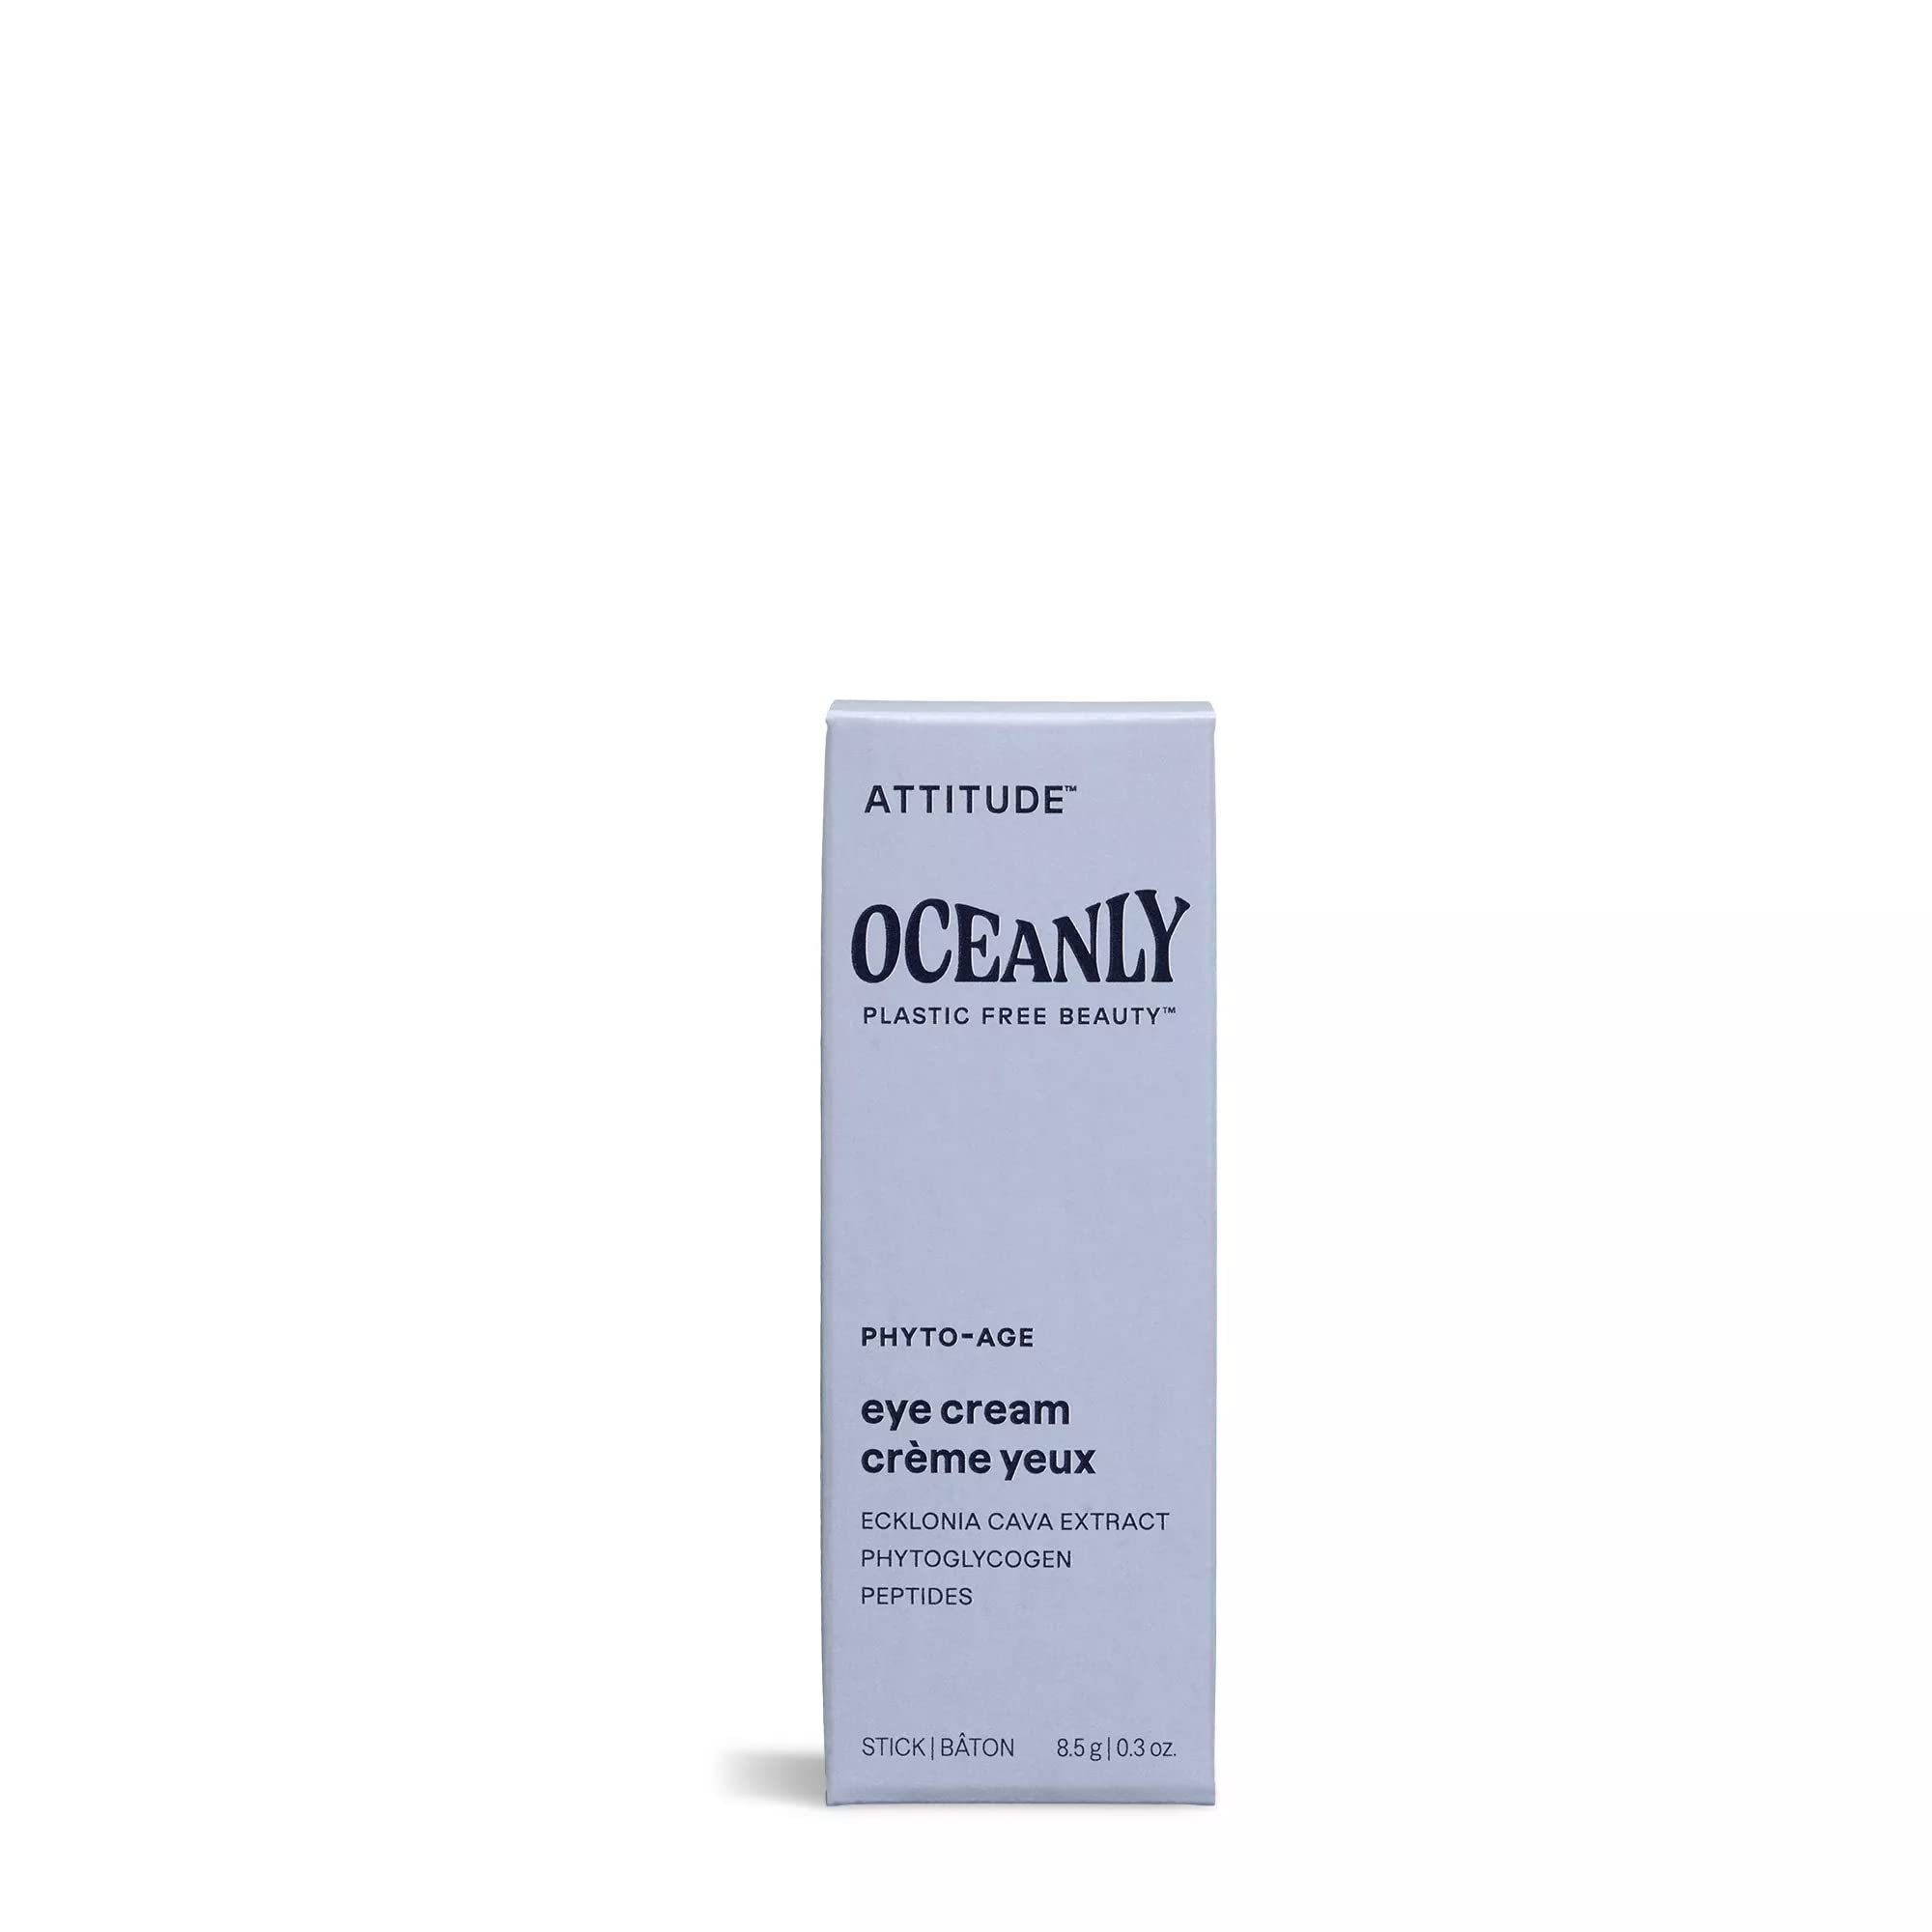 ATTITUDE Oceanly Eye Cream Bar, EWG Verified, Plastic-free, Plant and Mineral-Based Ingredients, Vegan and Cruelty-free Beauty Products, PHYTO AGE, Unscented, 0.3 Ounce